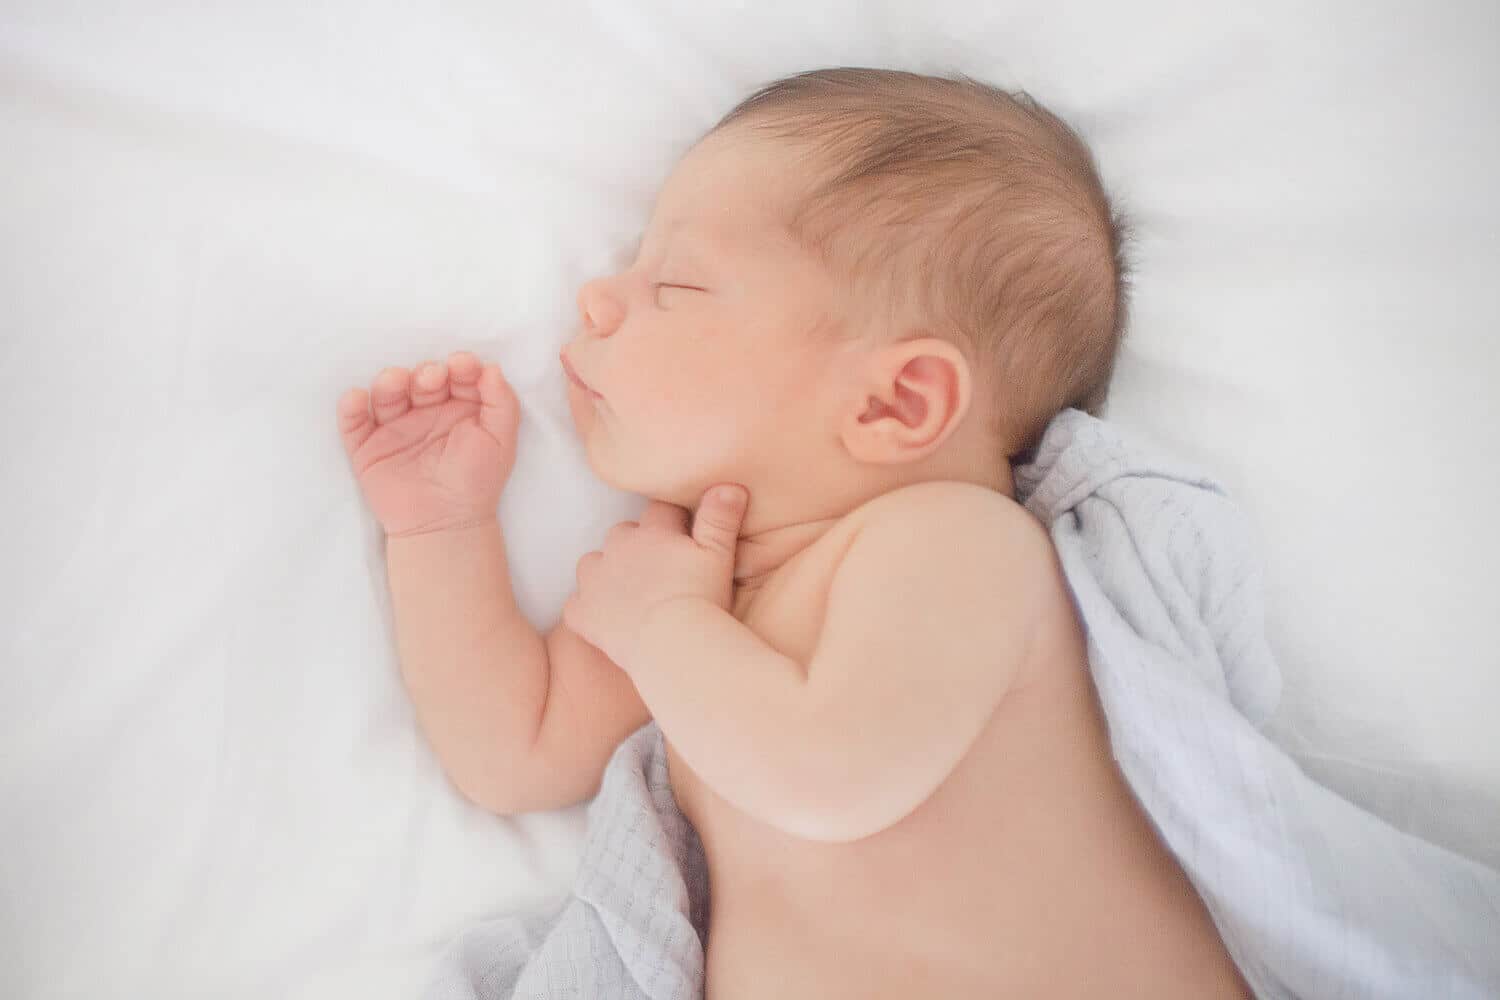 Newborn baby laying on bed